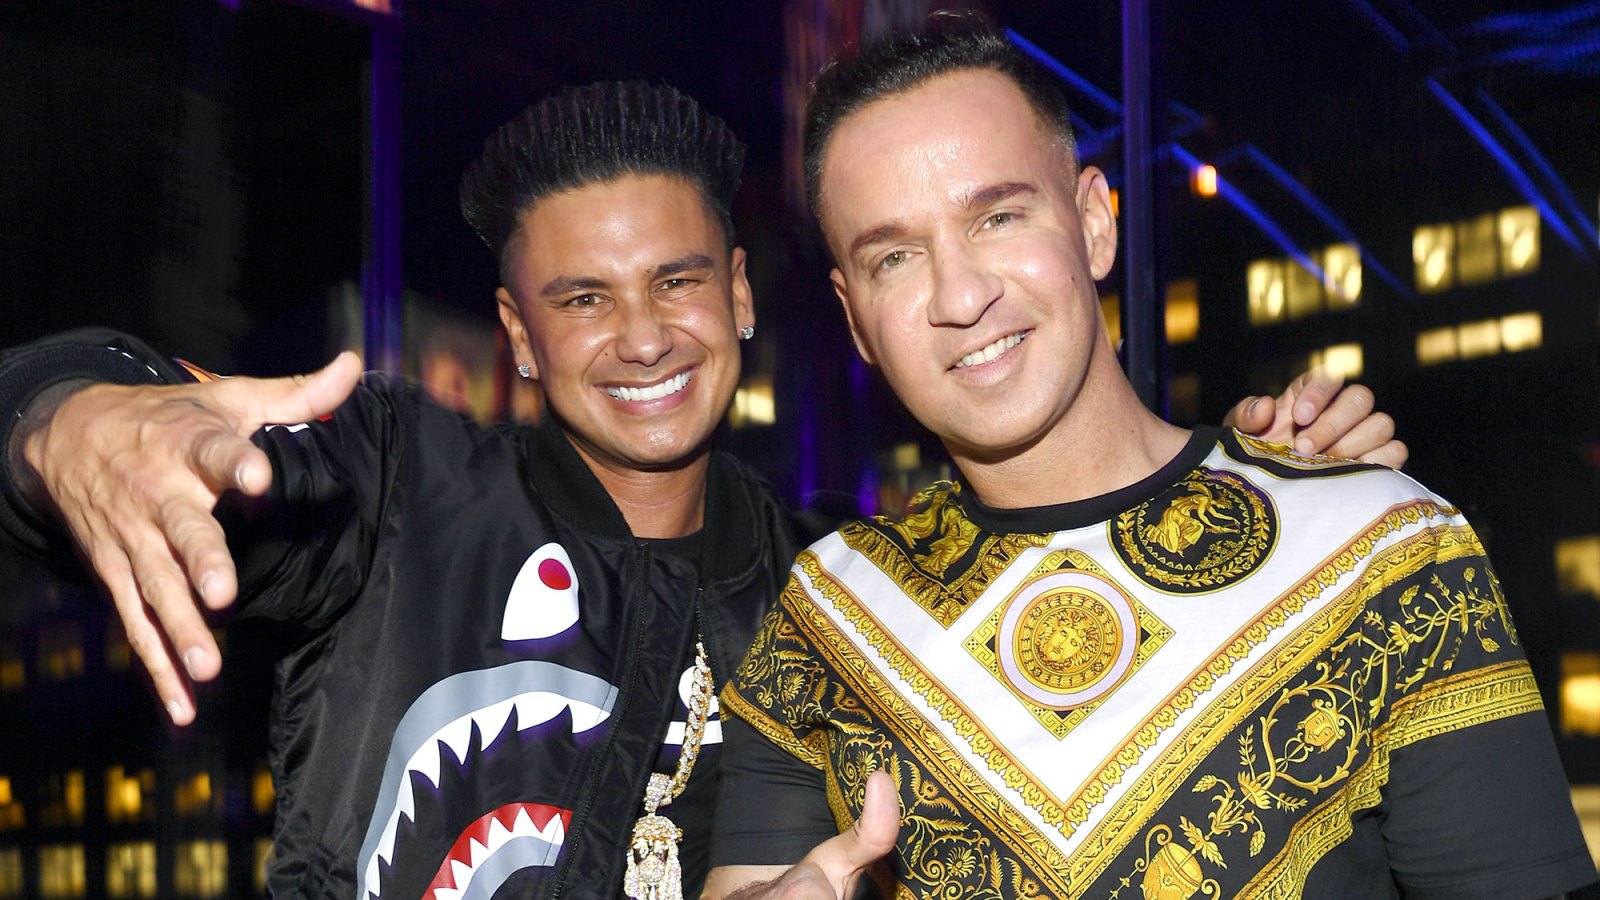 Pauly D Believes Mike ‘The Situation’ Sorrentino Gets Special Treatment in Prison ‘He Gets His Pick of All the Food’